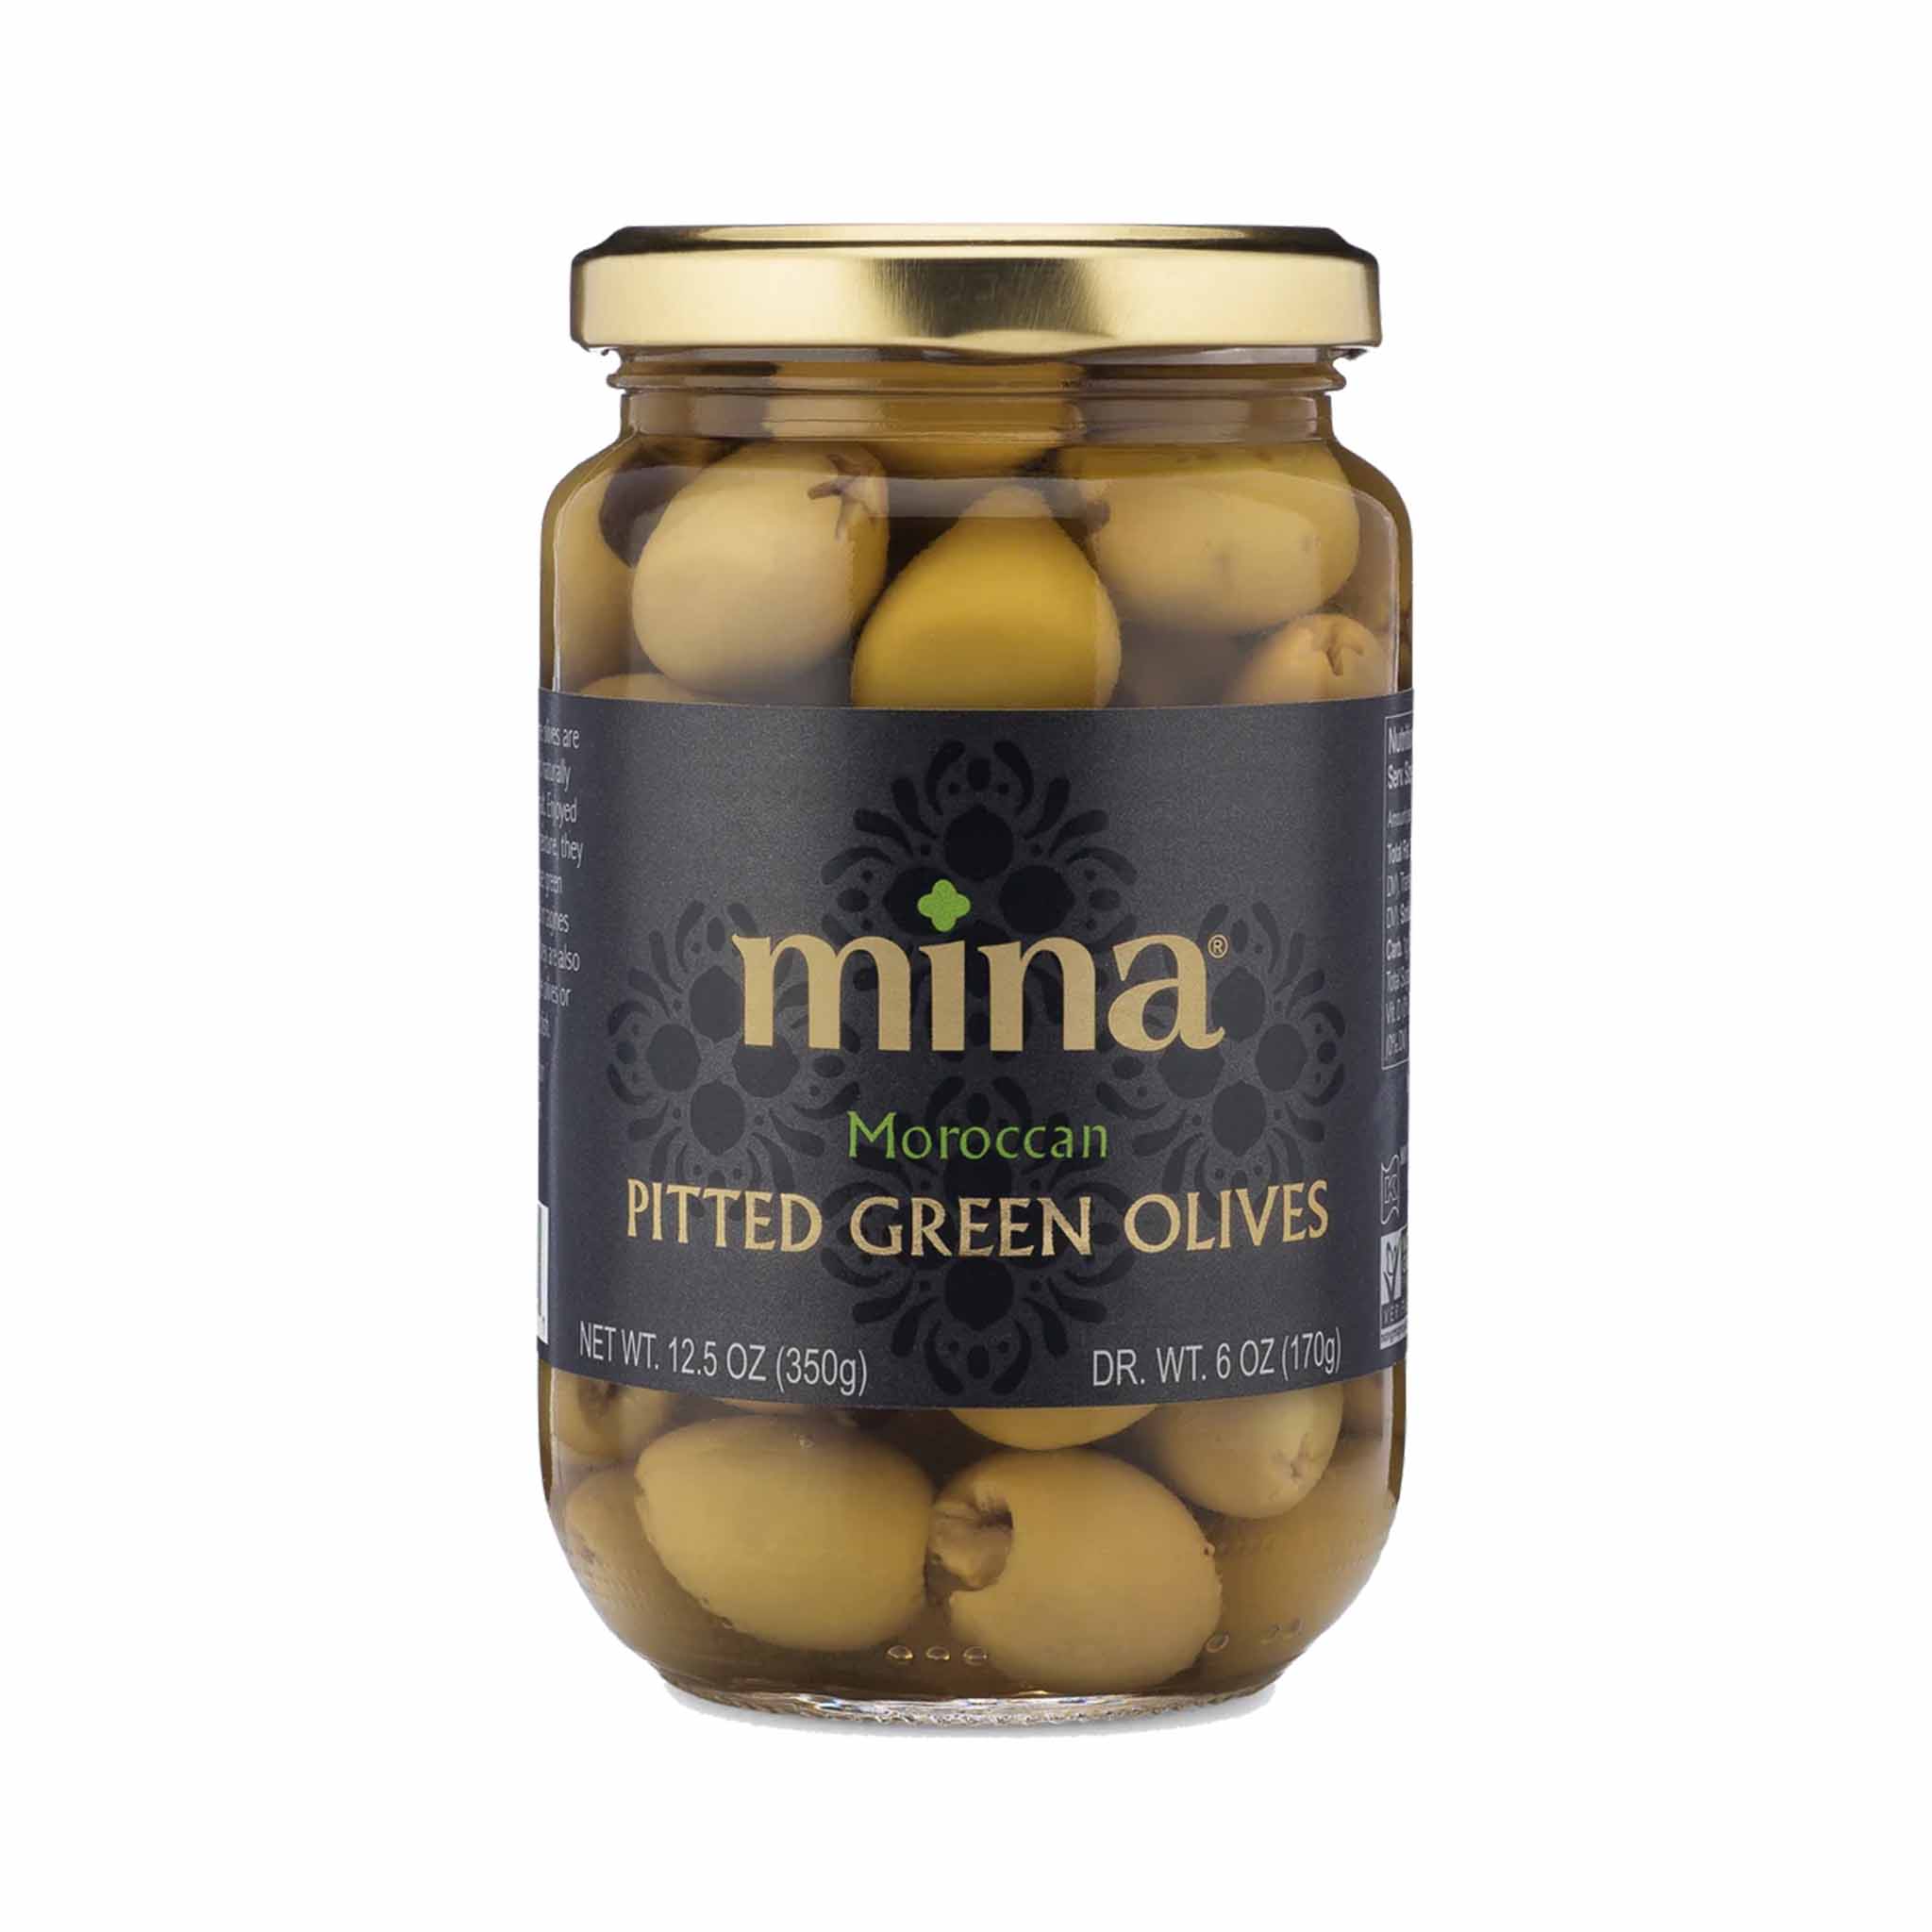 MINA GREEN PITTED OLIVE 12.5oz